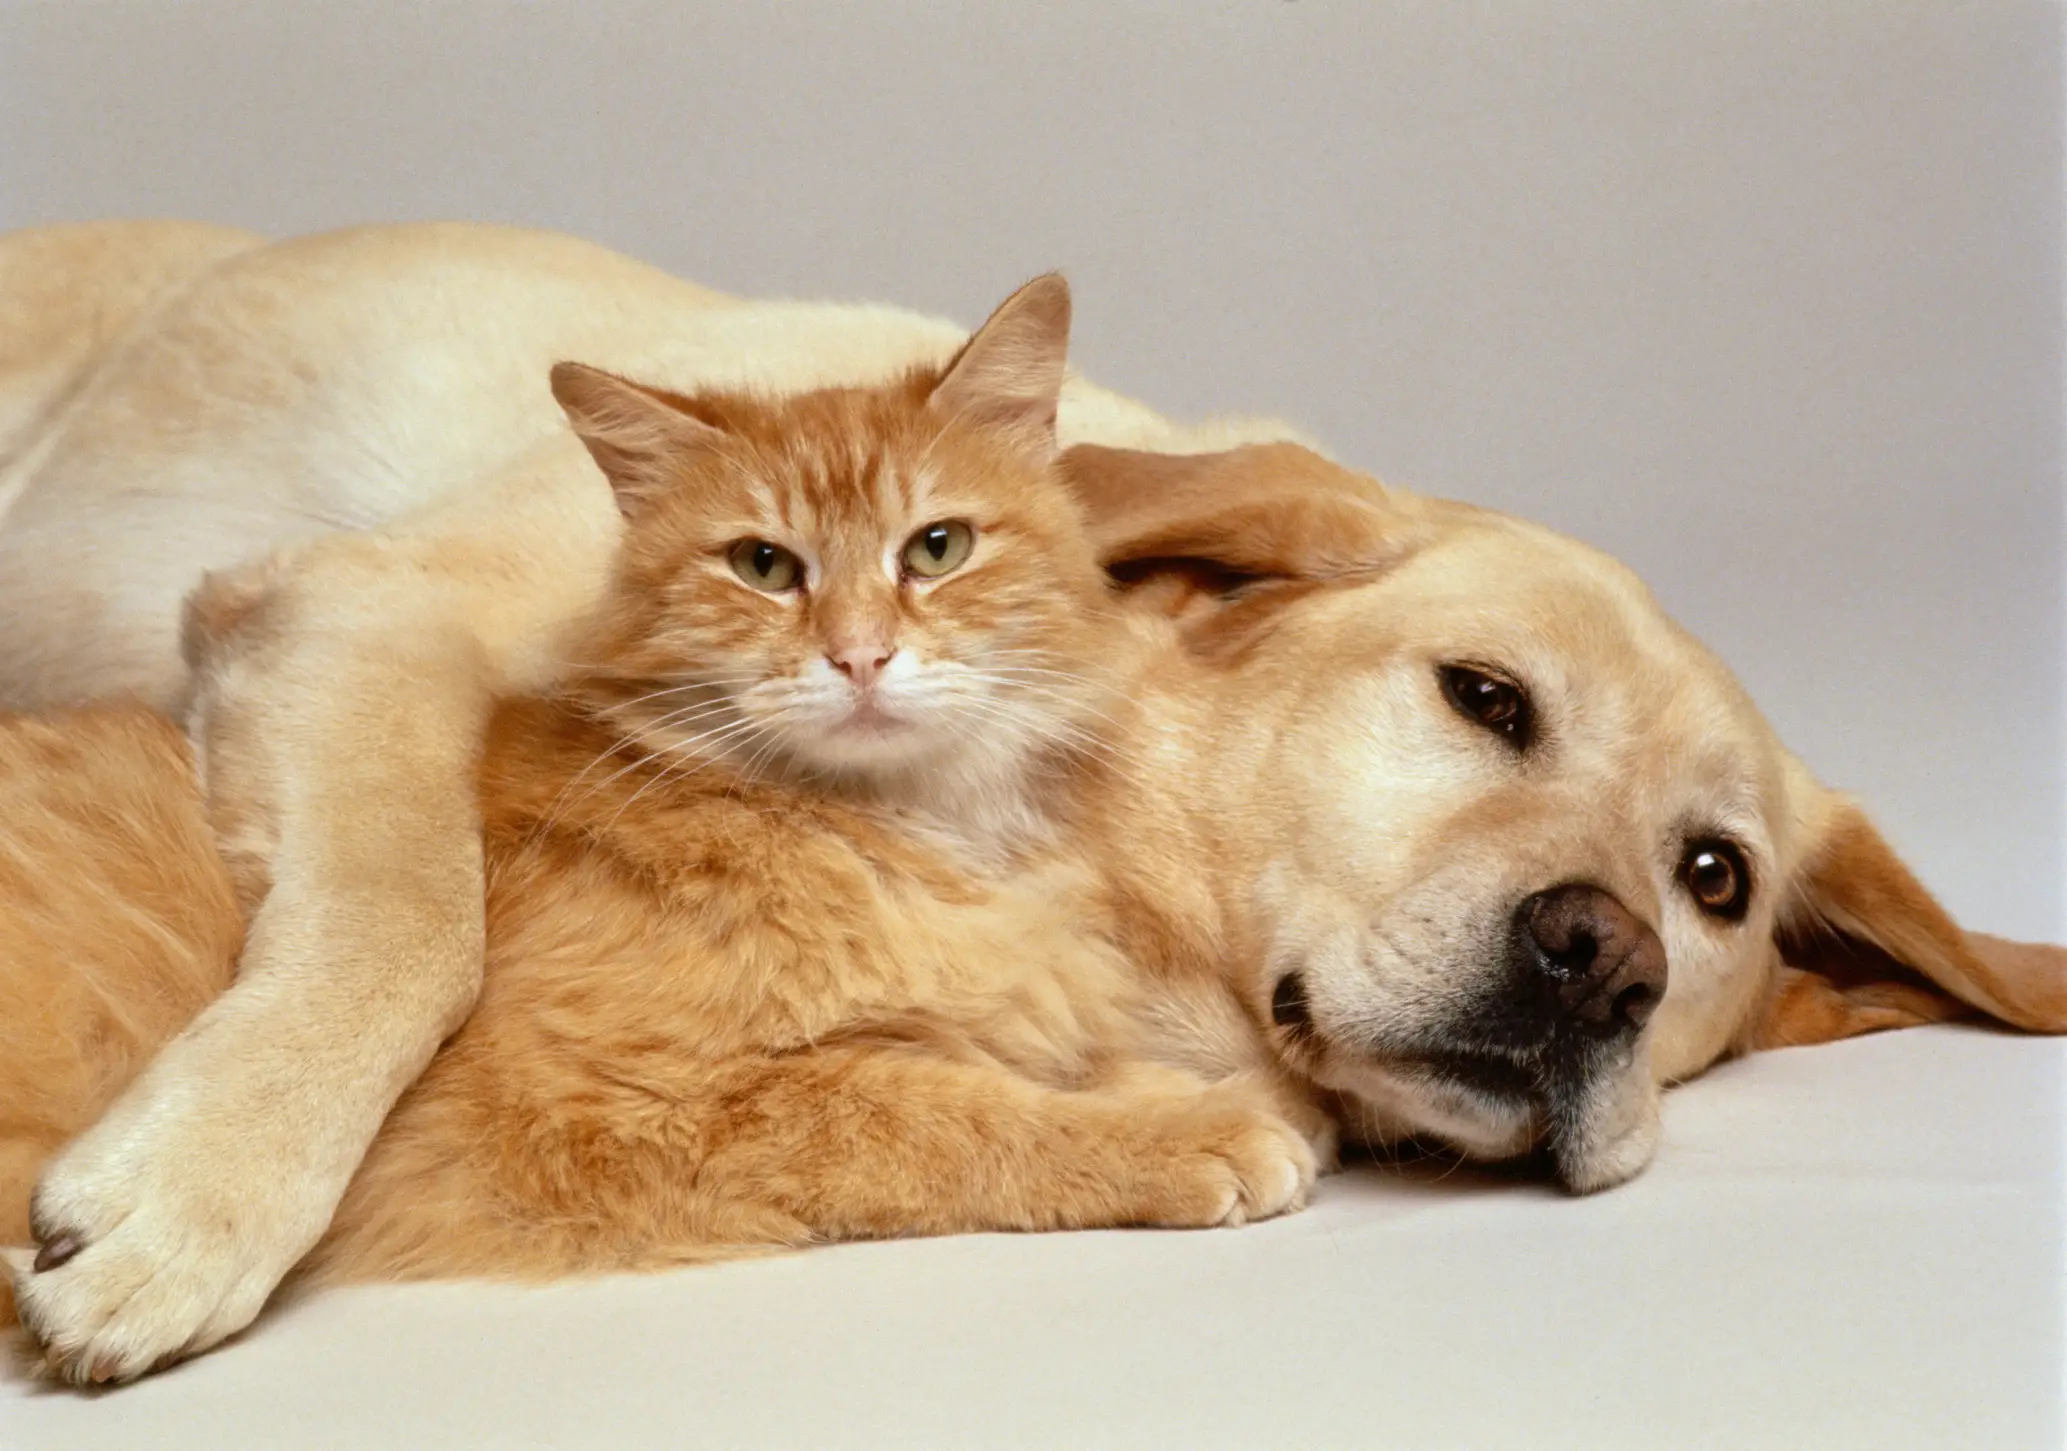 The Heartwarming Cat and Dog Story You Don't Want to Miss!